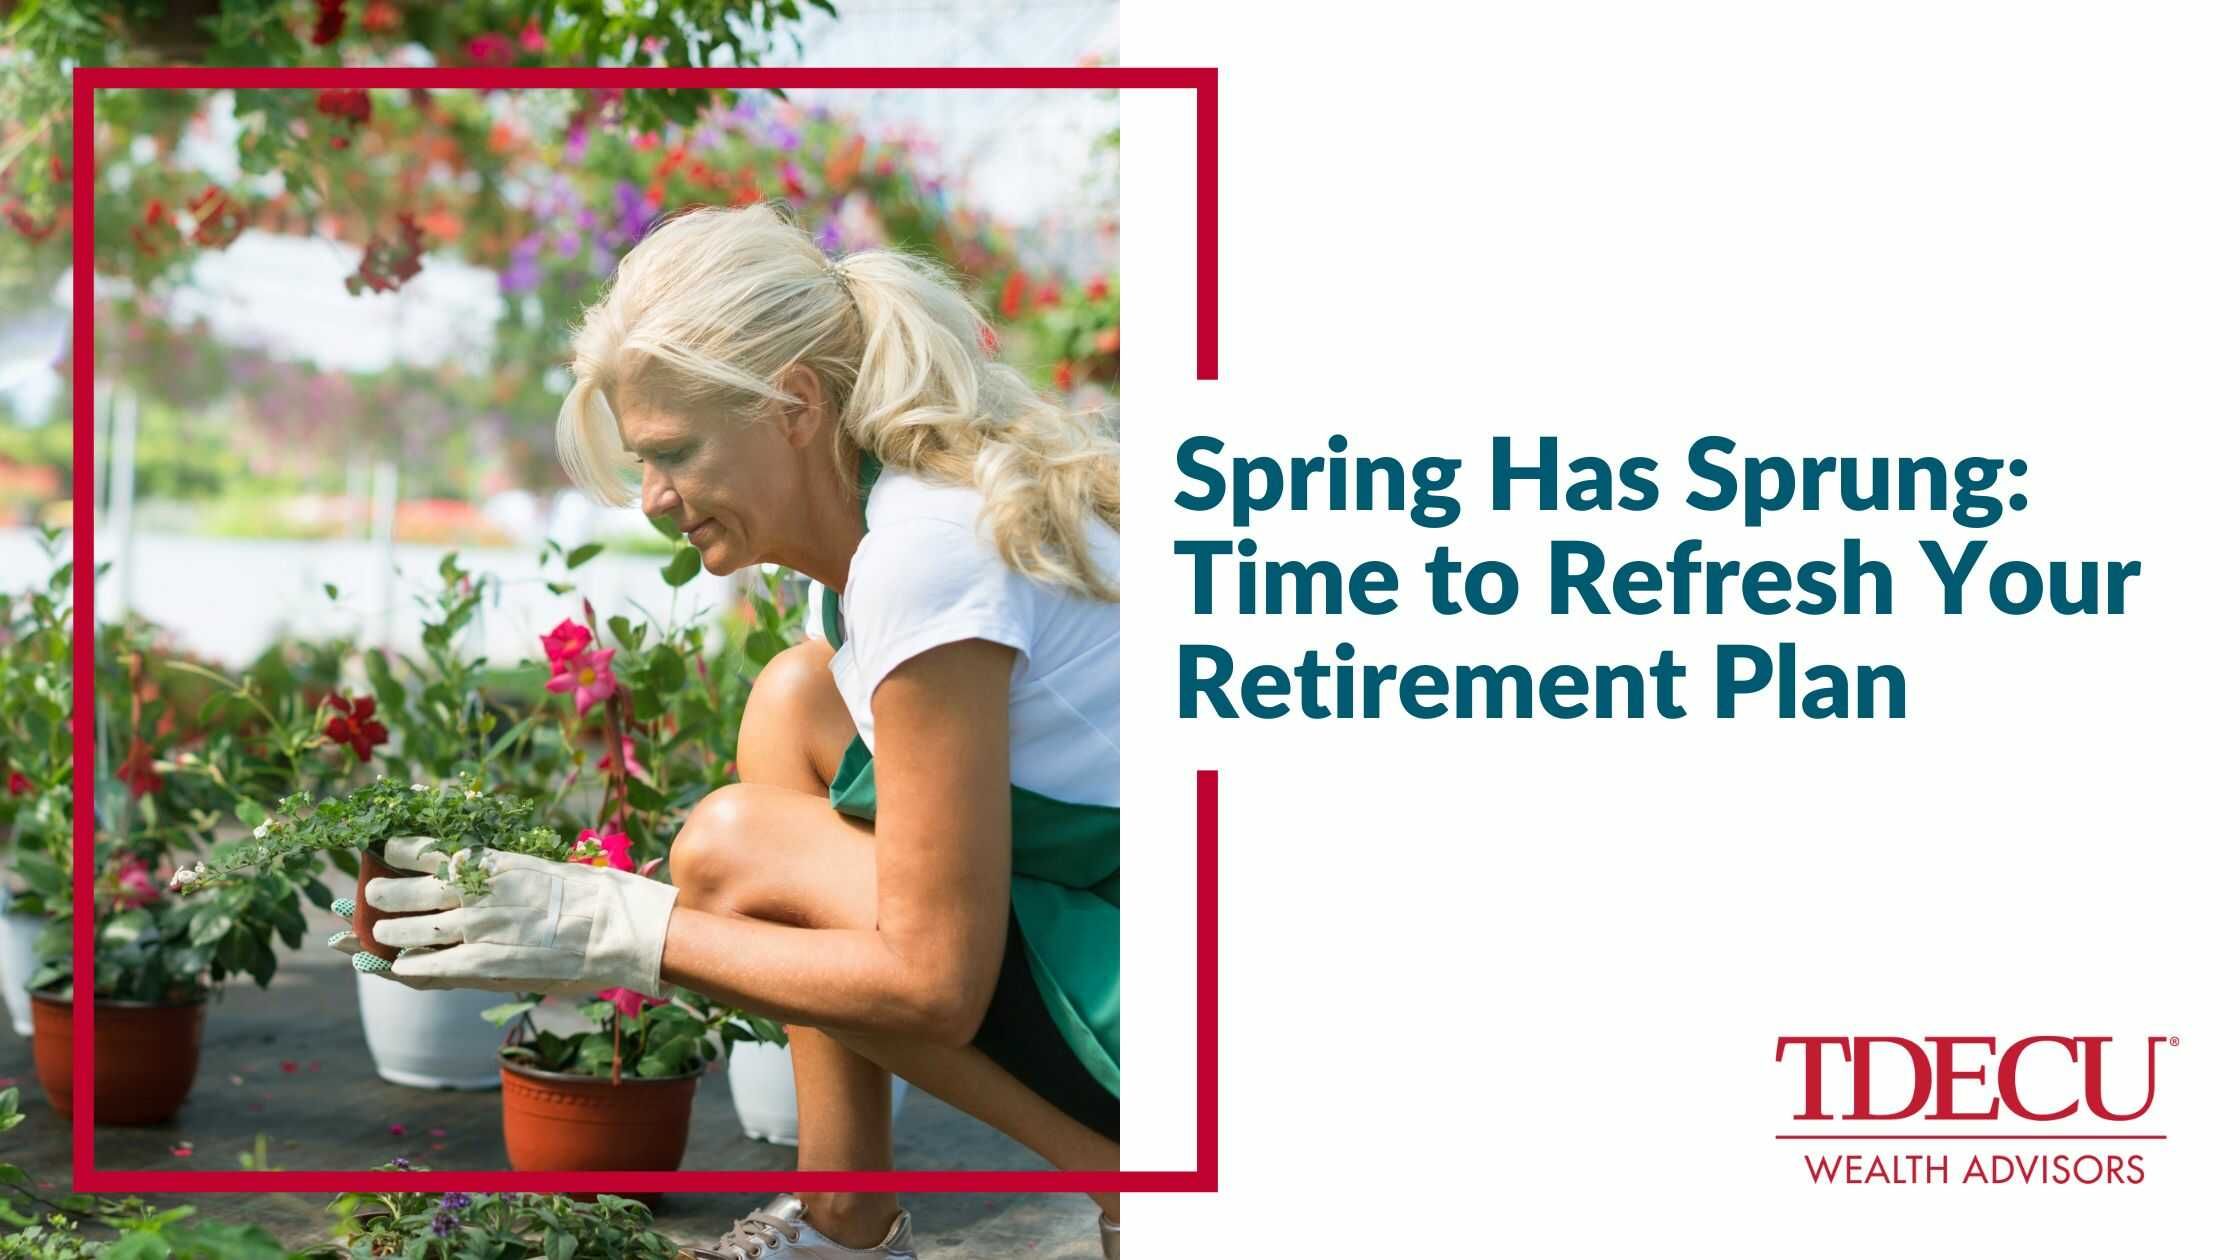 Spring Has Sprung: Time to Refresh Your Retirement Plan